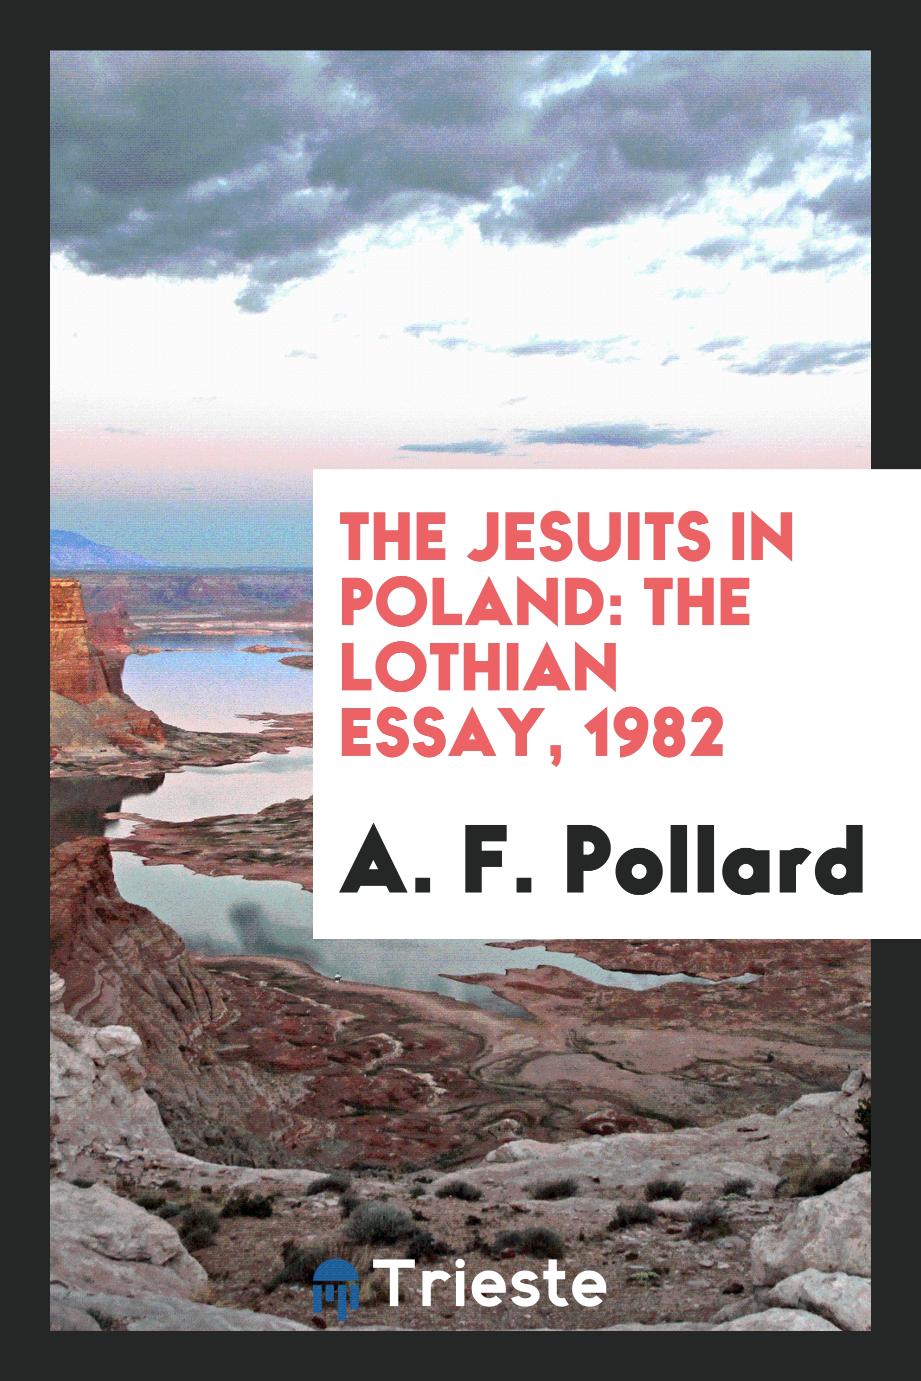 The Jesuits in Poland: The Lothian Essay, 1982